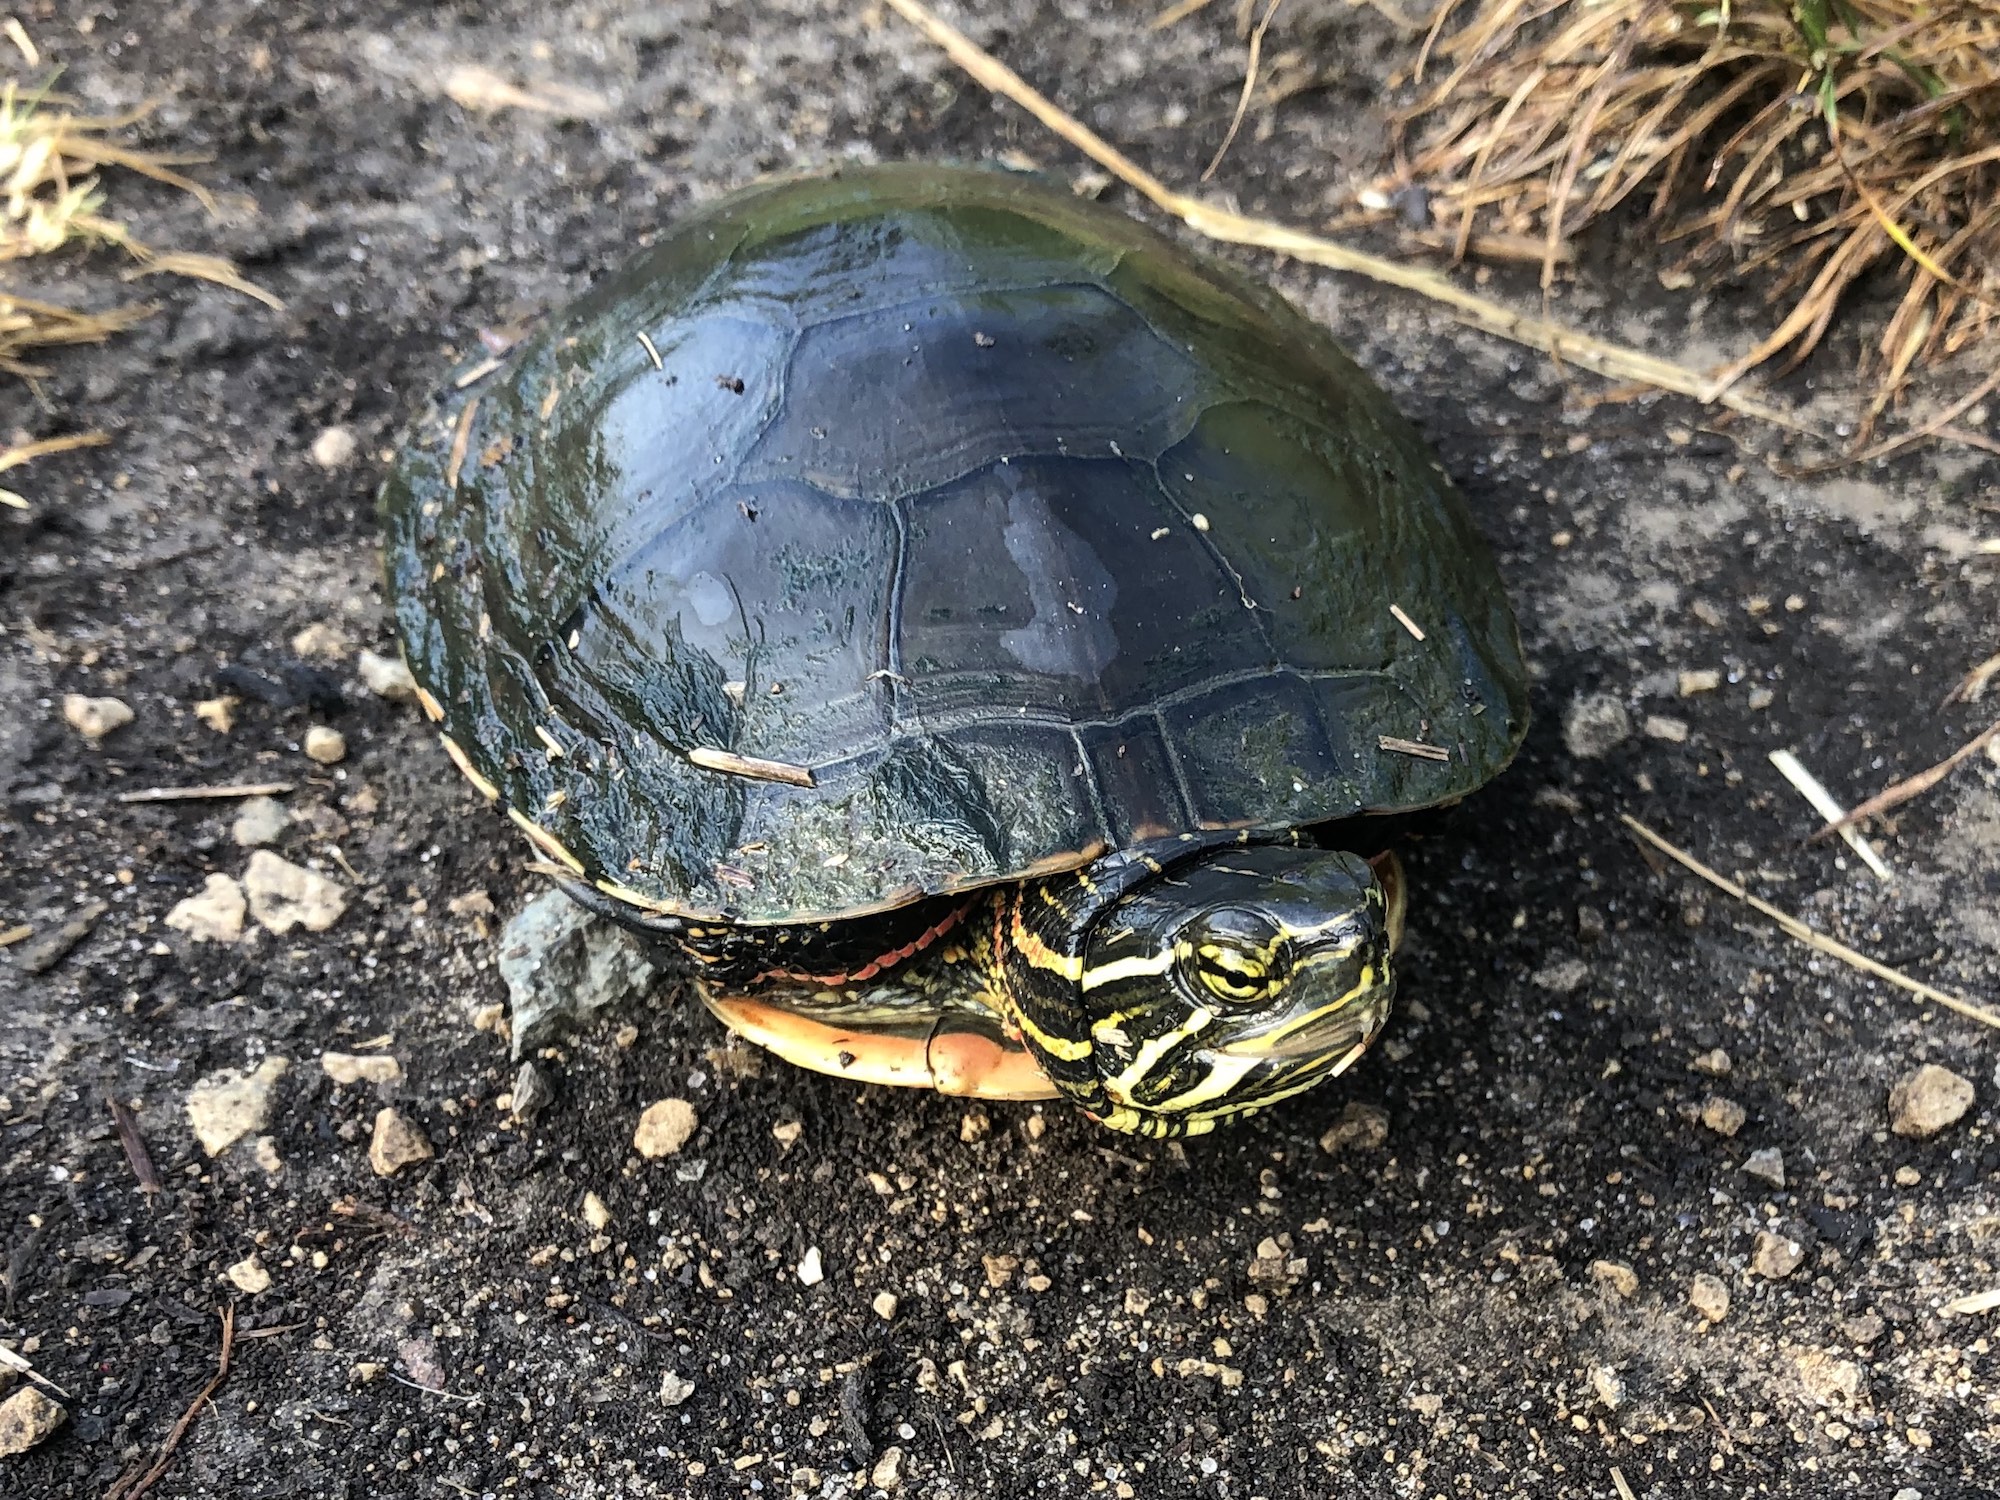 Painted Turtle by Marion Dunn Pond in Madison, Wisconsin on June 18, 2021.